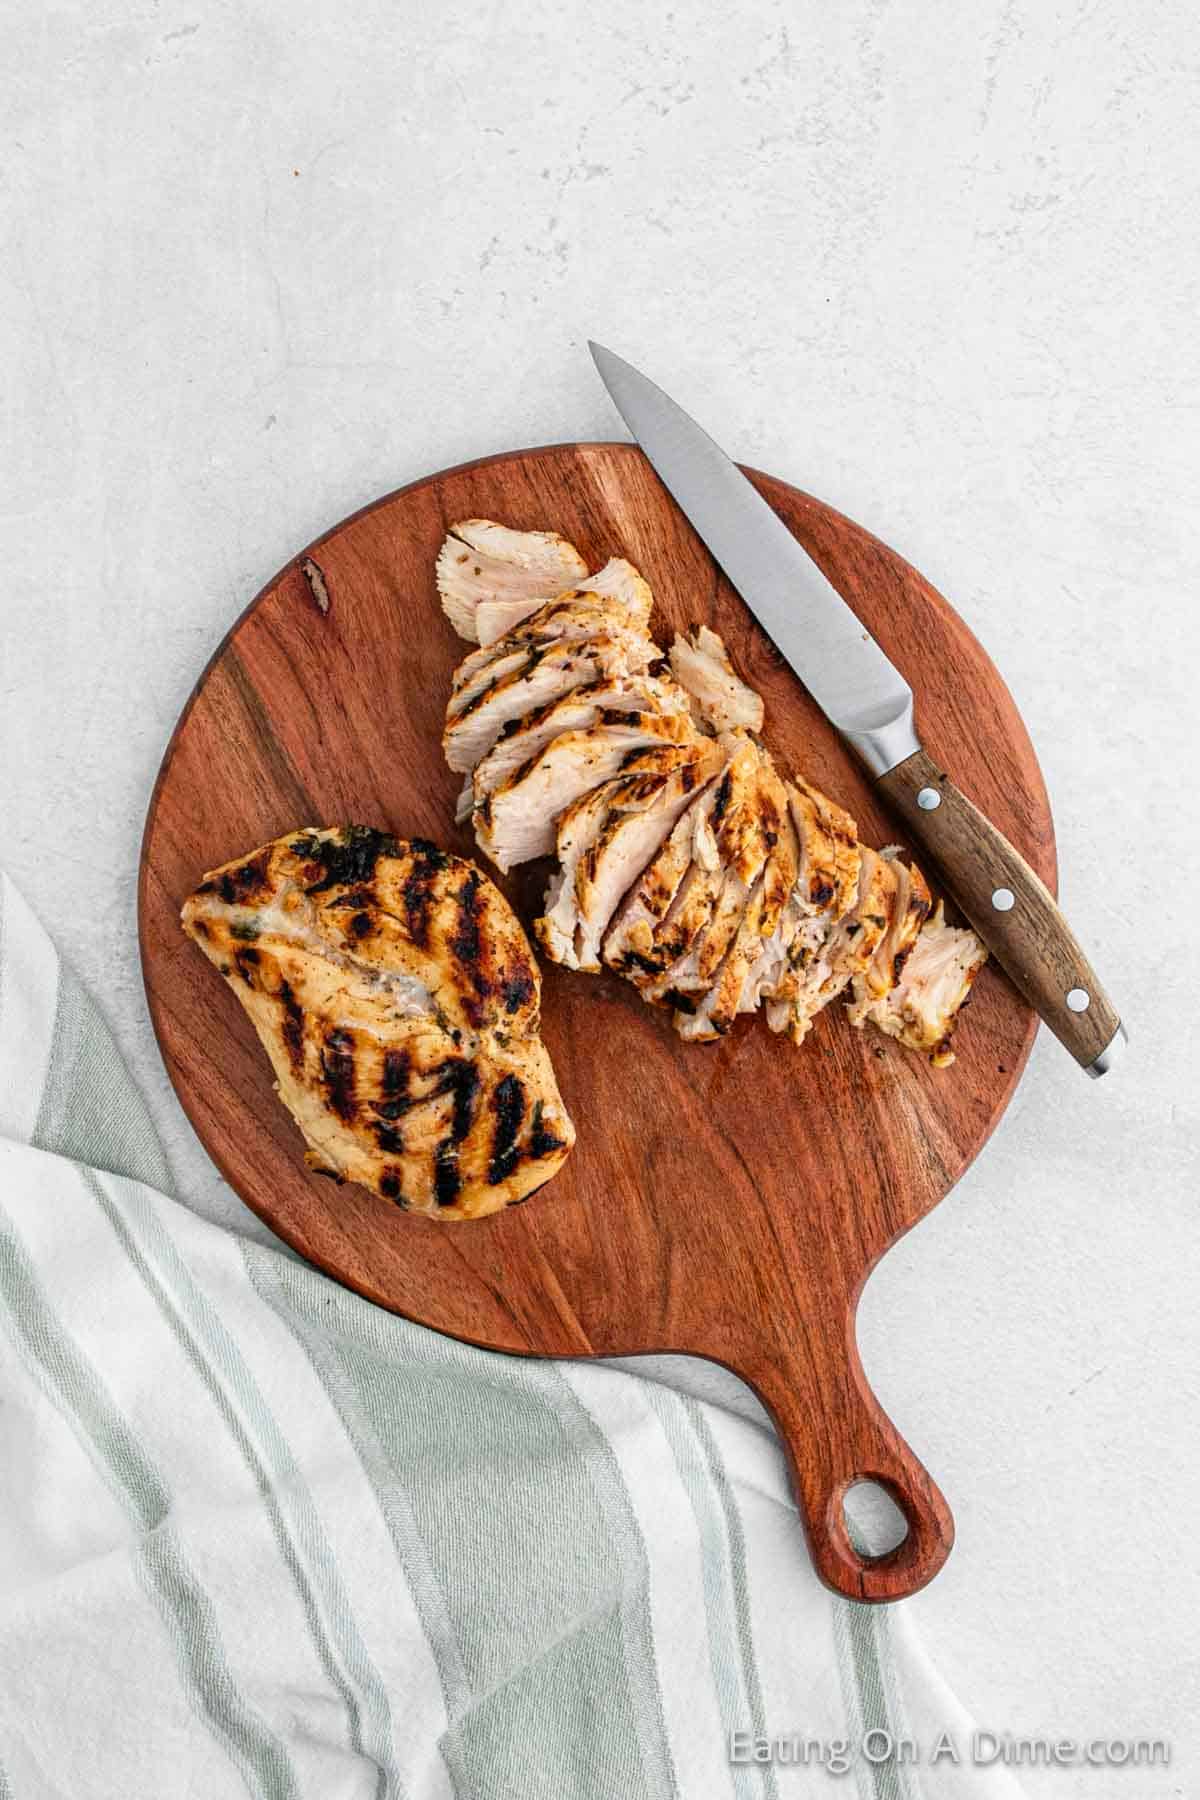 Slicing chicken on a cutting board with a knife